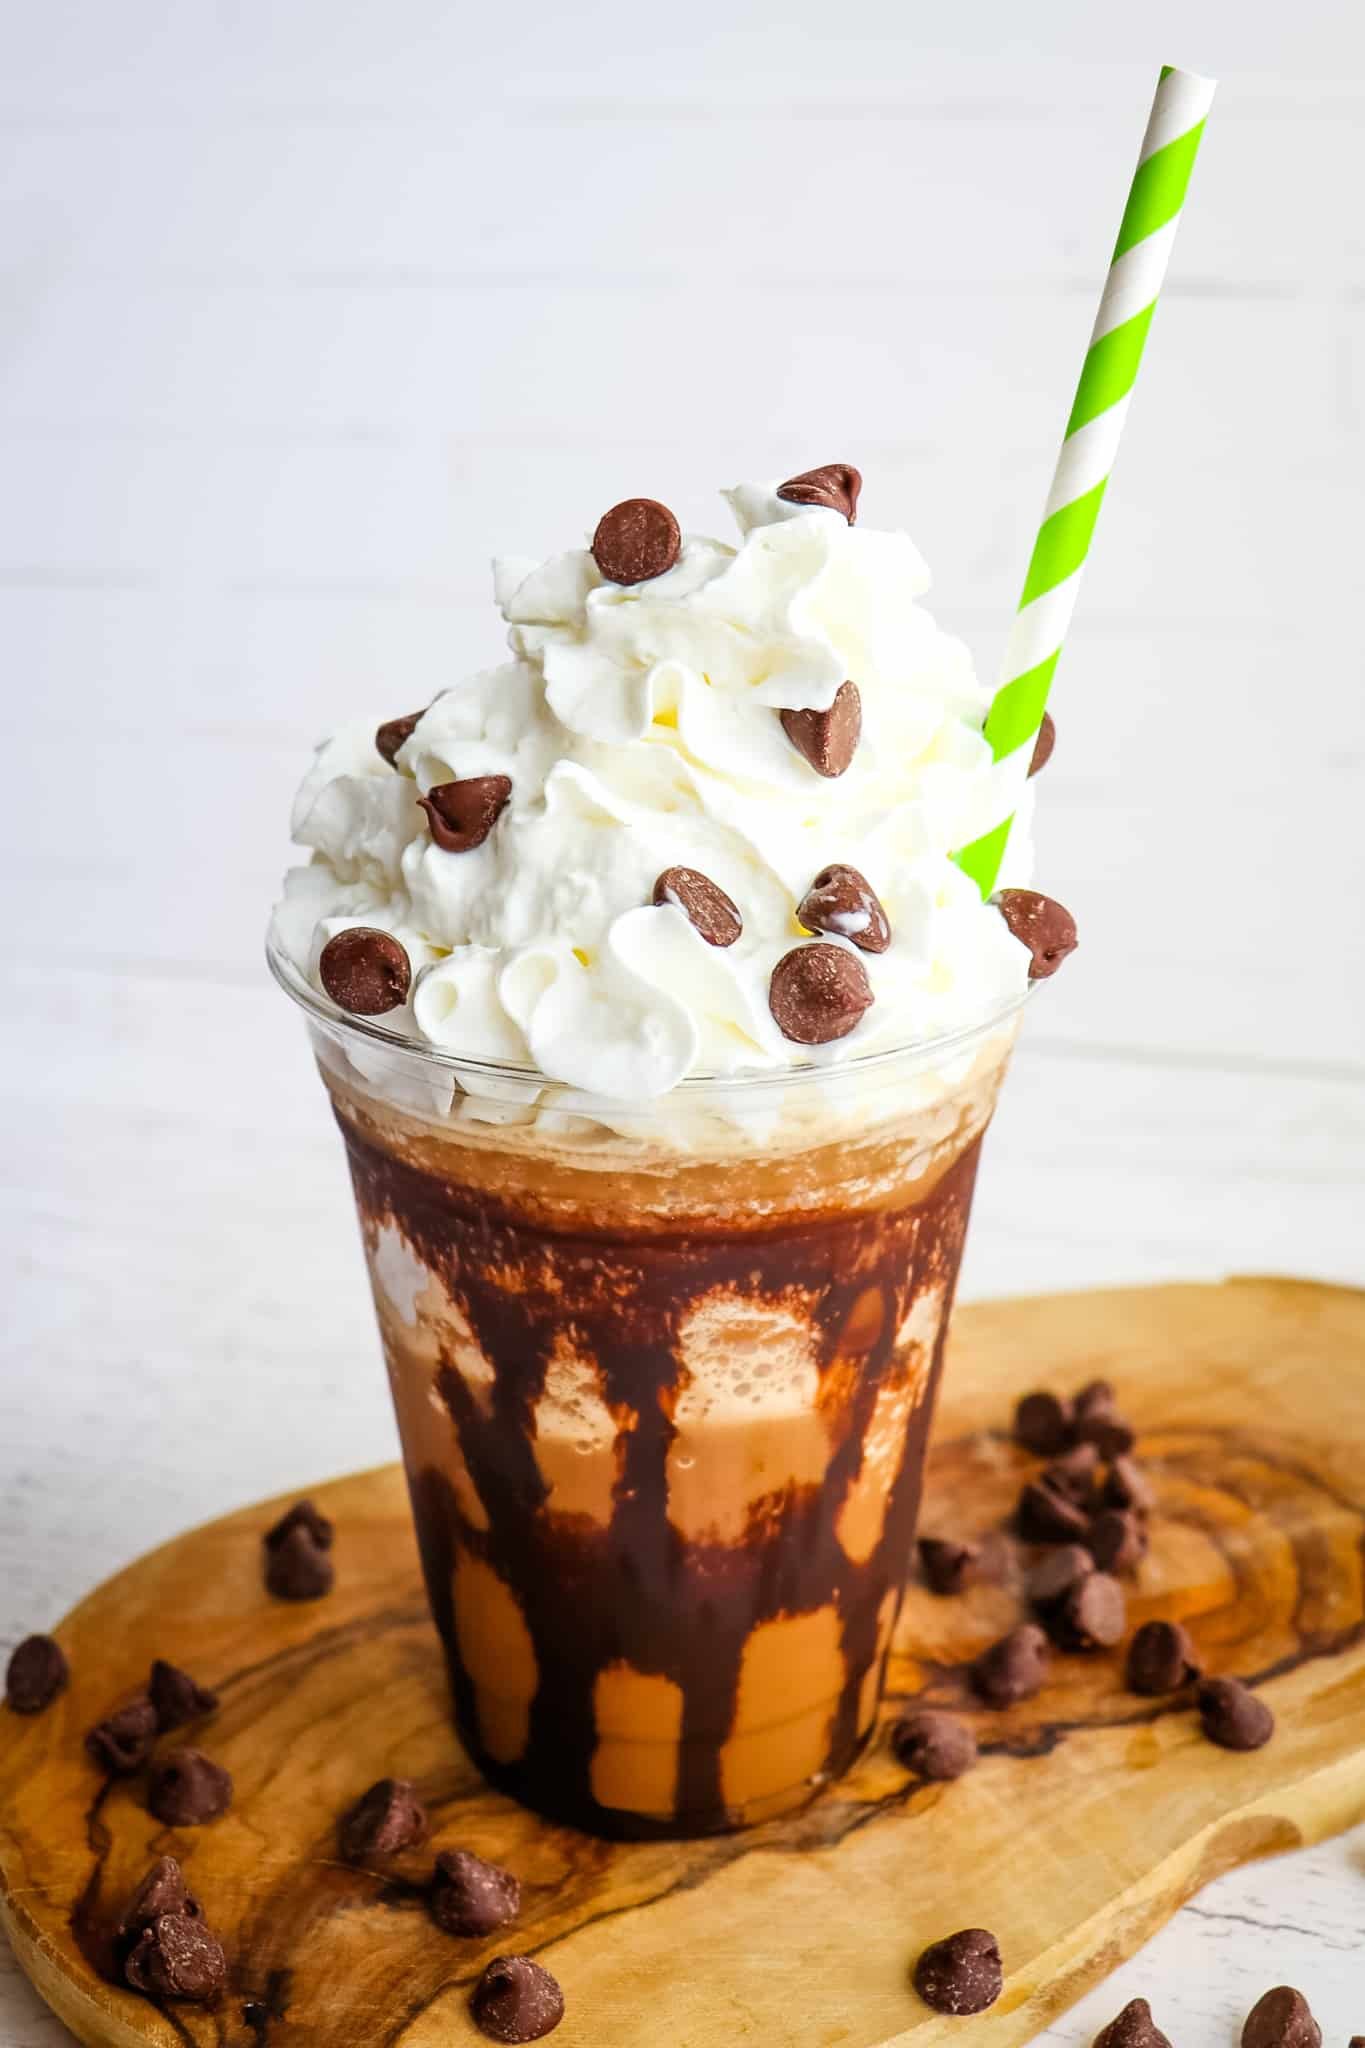 Mocha frappuccino recipe topped with whipped cream and chocolate chips.